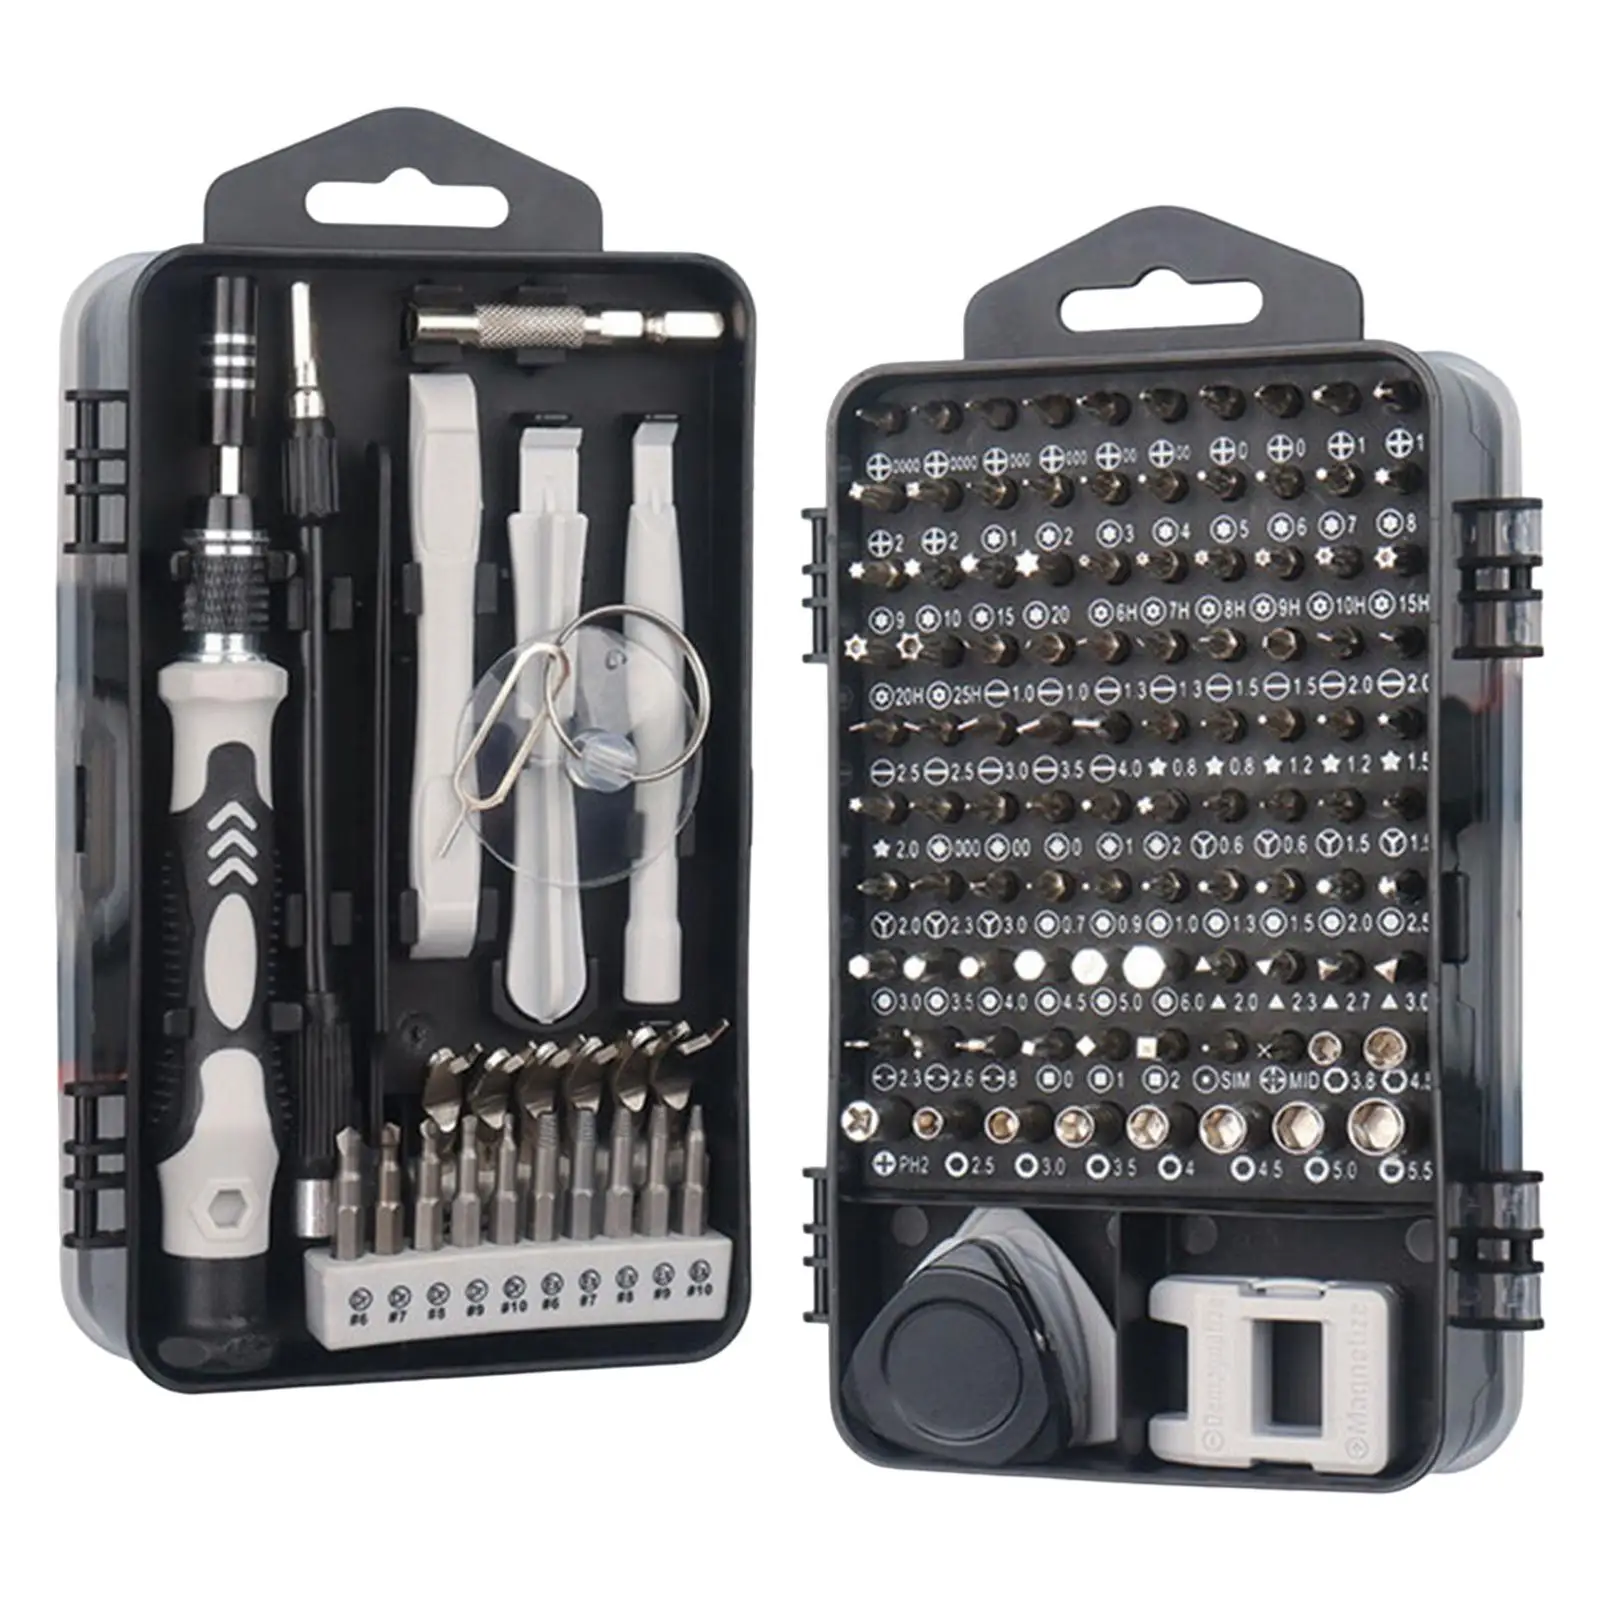 135Pcs Multifunction Hand Tool Precision Screwdriver Set Electronic Repair Tool Kit for Cellphone PC Game Console Watch Phone